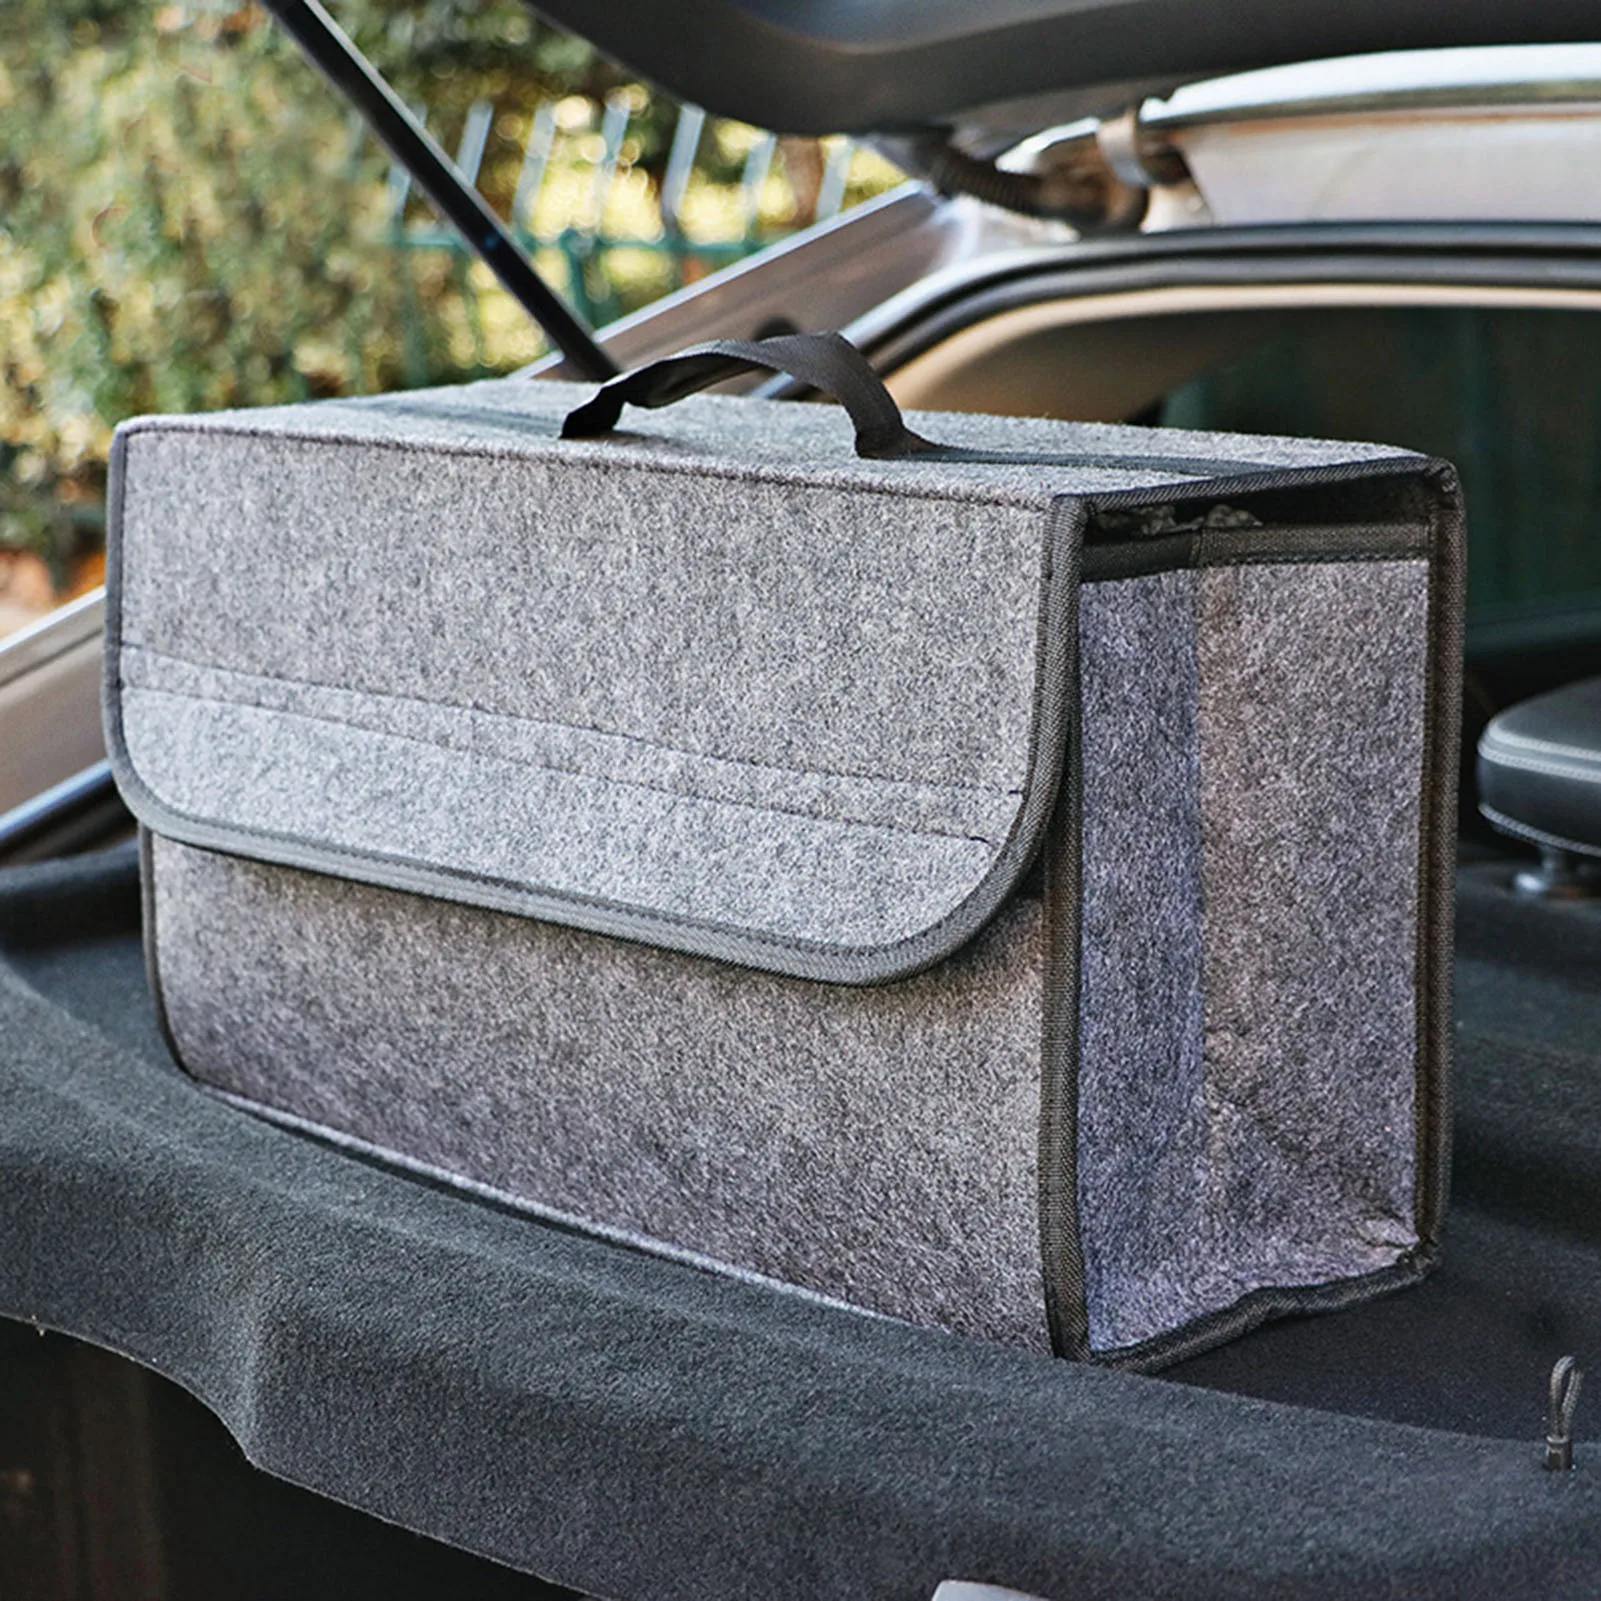 

Large Non-slip Car Trunk Organizer Foldable Storage Box Case Felt Backseat Storage Bag Auto Stowing Tidying Container Bags